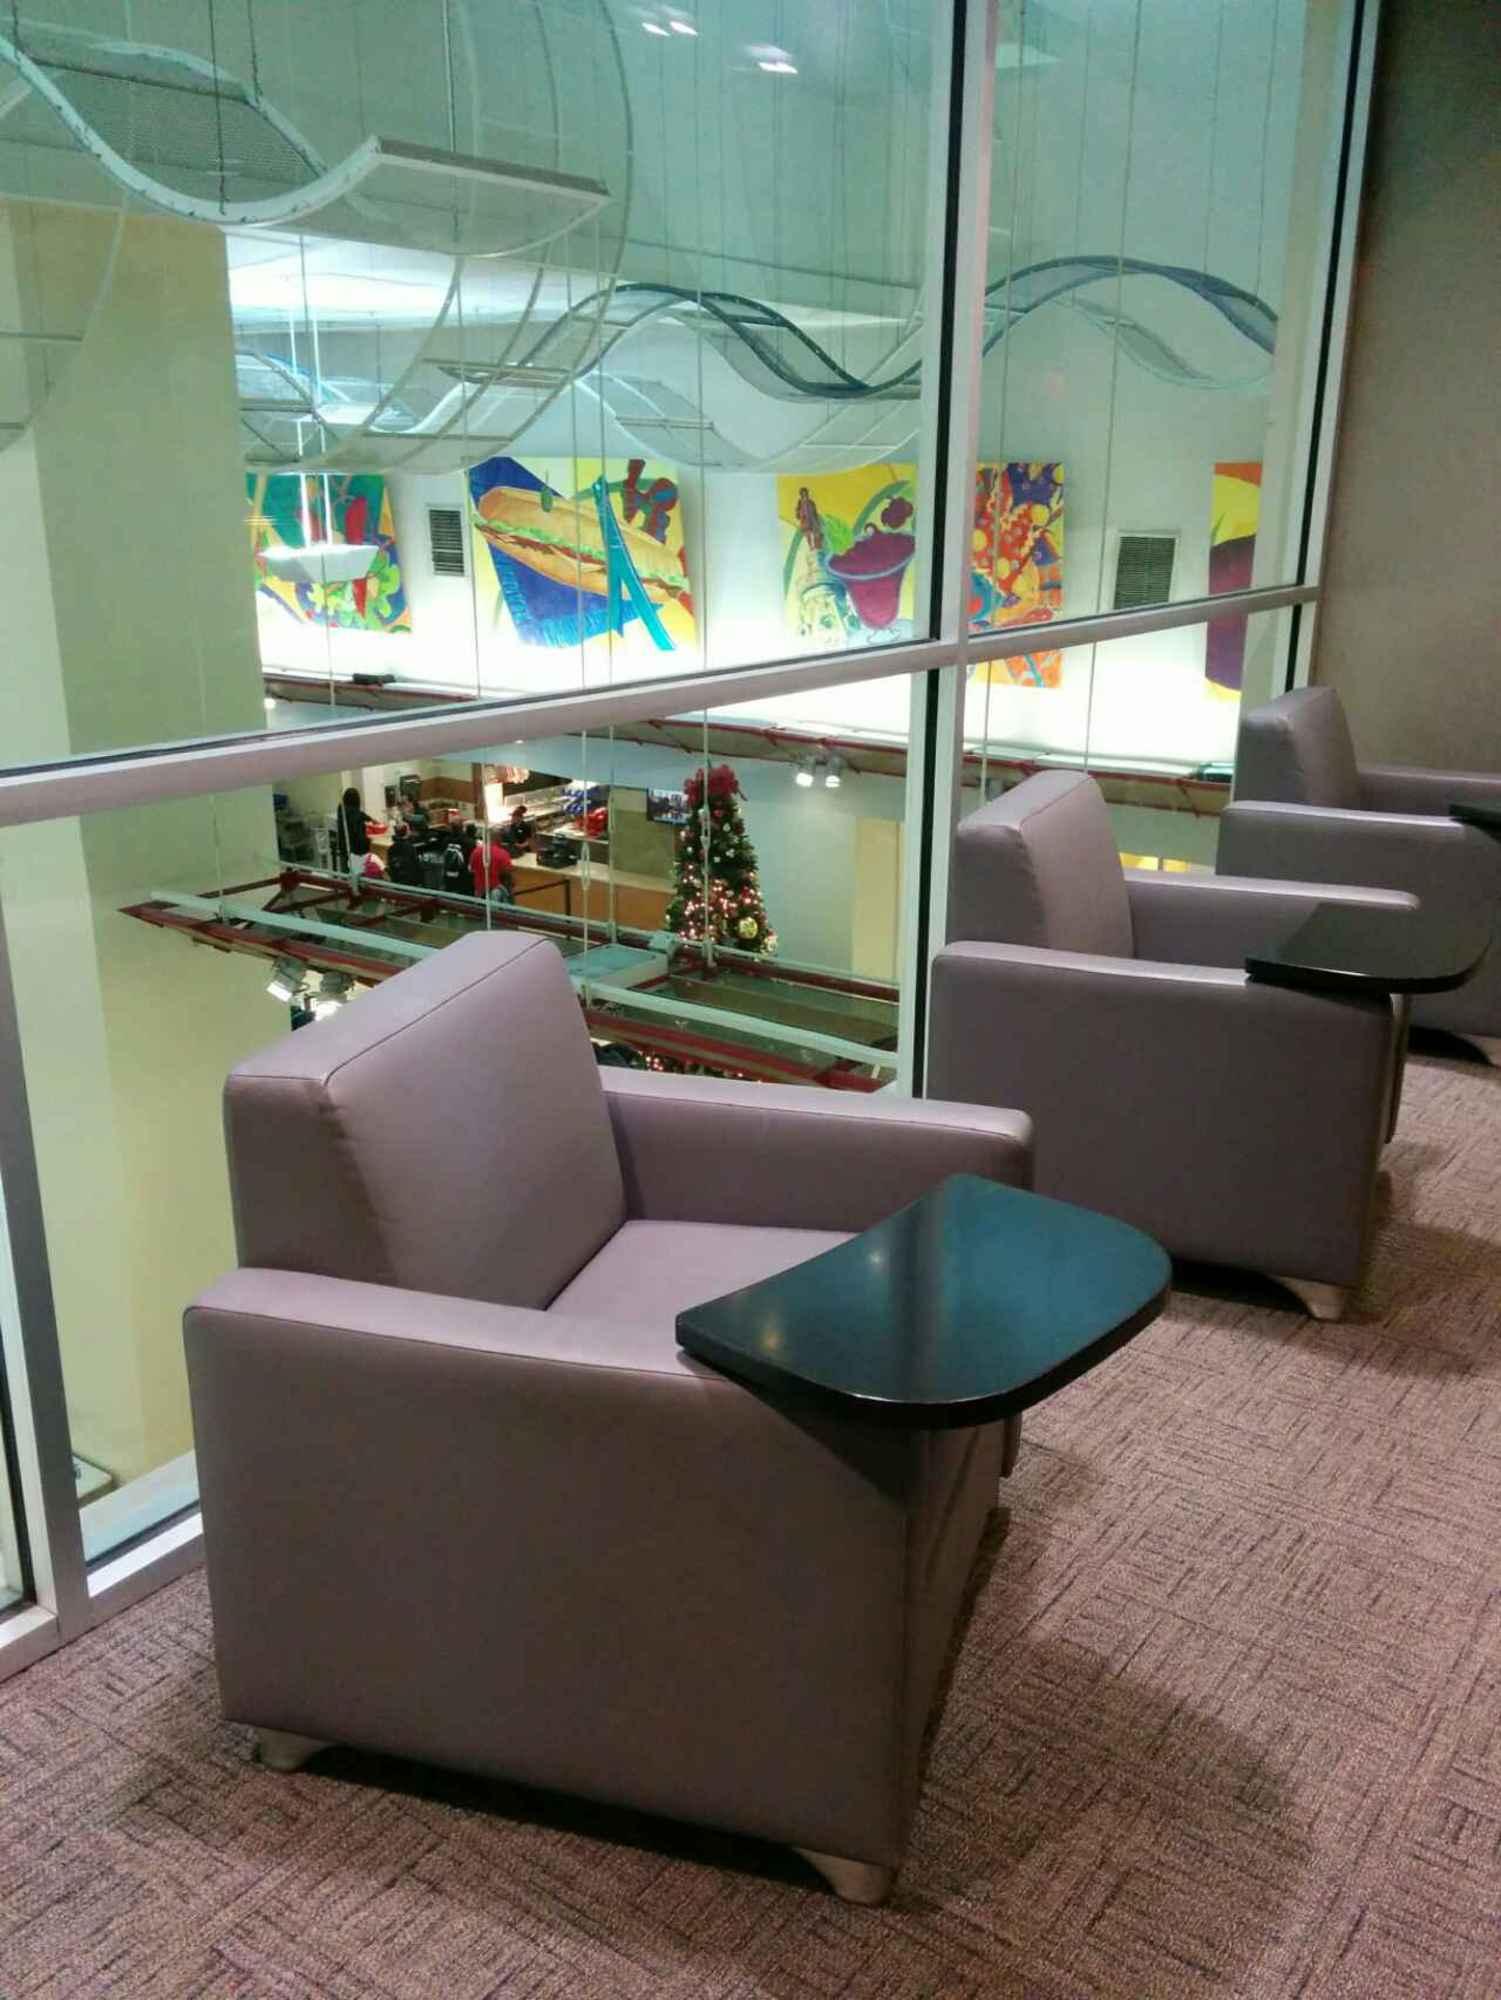 American Airlines Admirals Club image 7 of 48